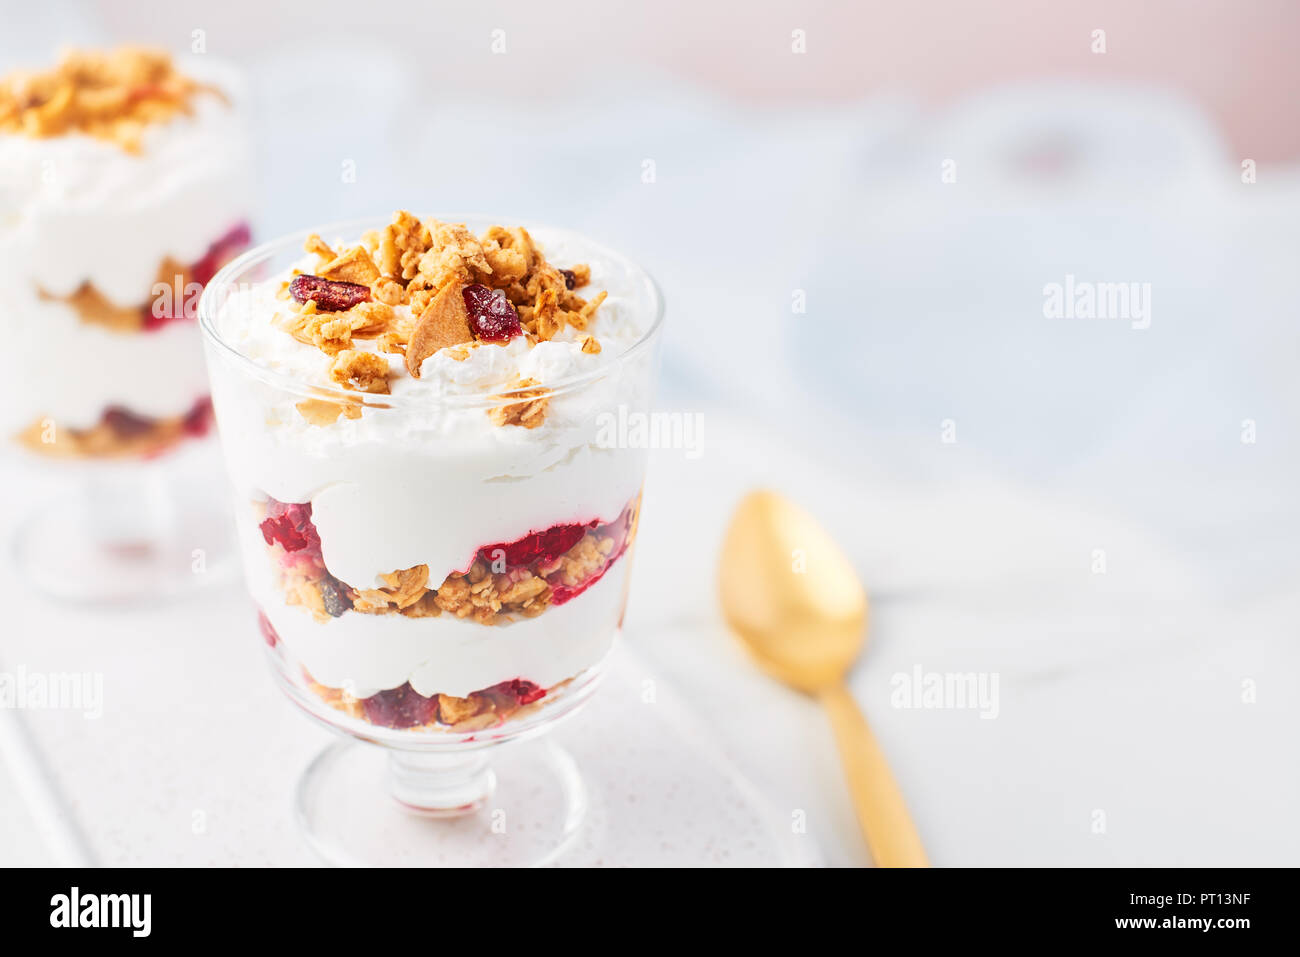 Close up of healthy raspberry yogurt parfait in a glass with golden spoon on white marble table over pink background with copy space. Stock Photo